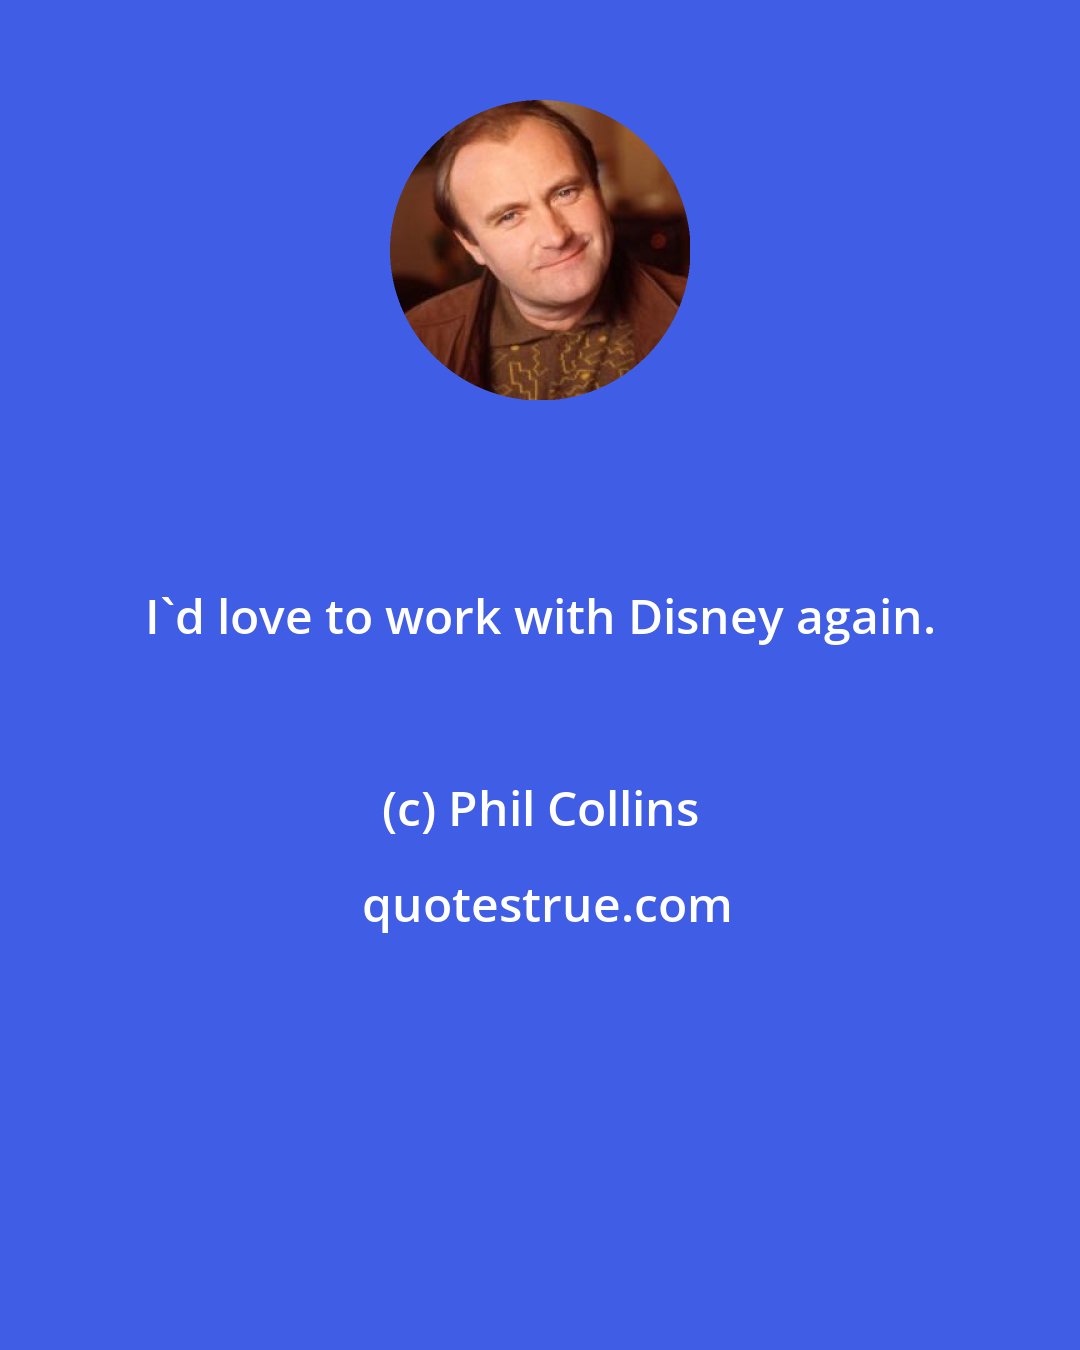 Phil Collins: I'd love to work with Disney again.